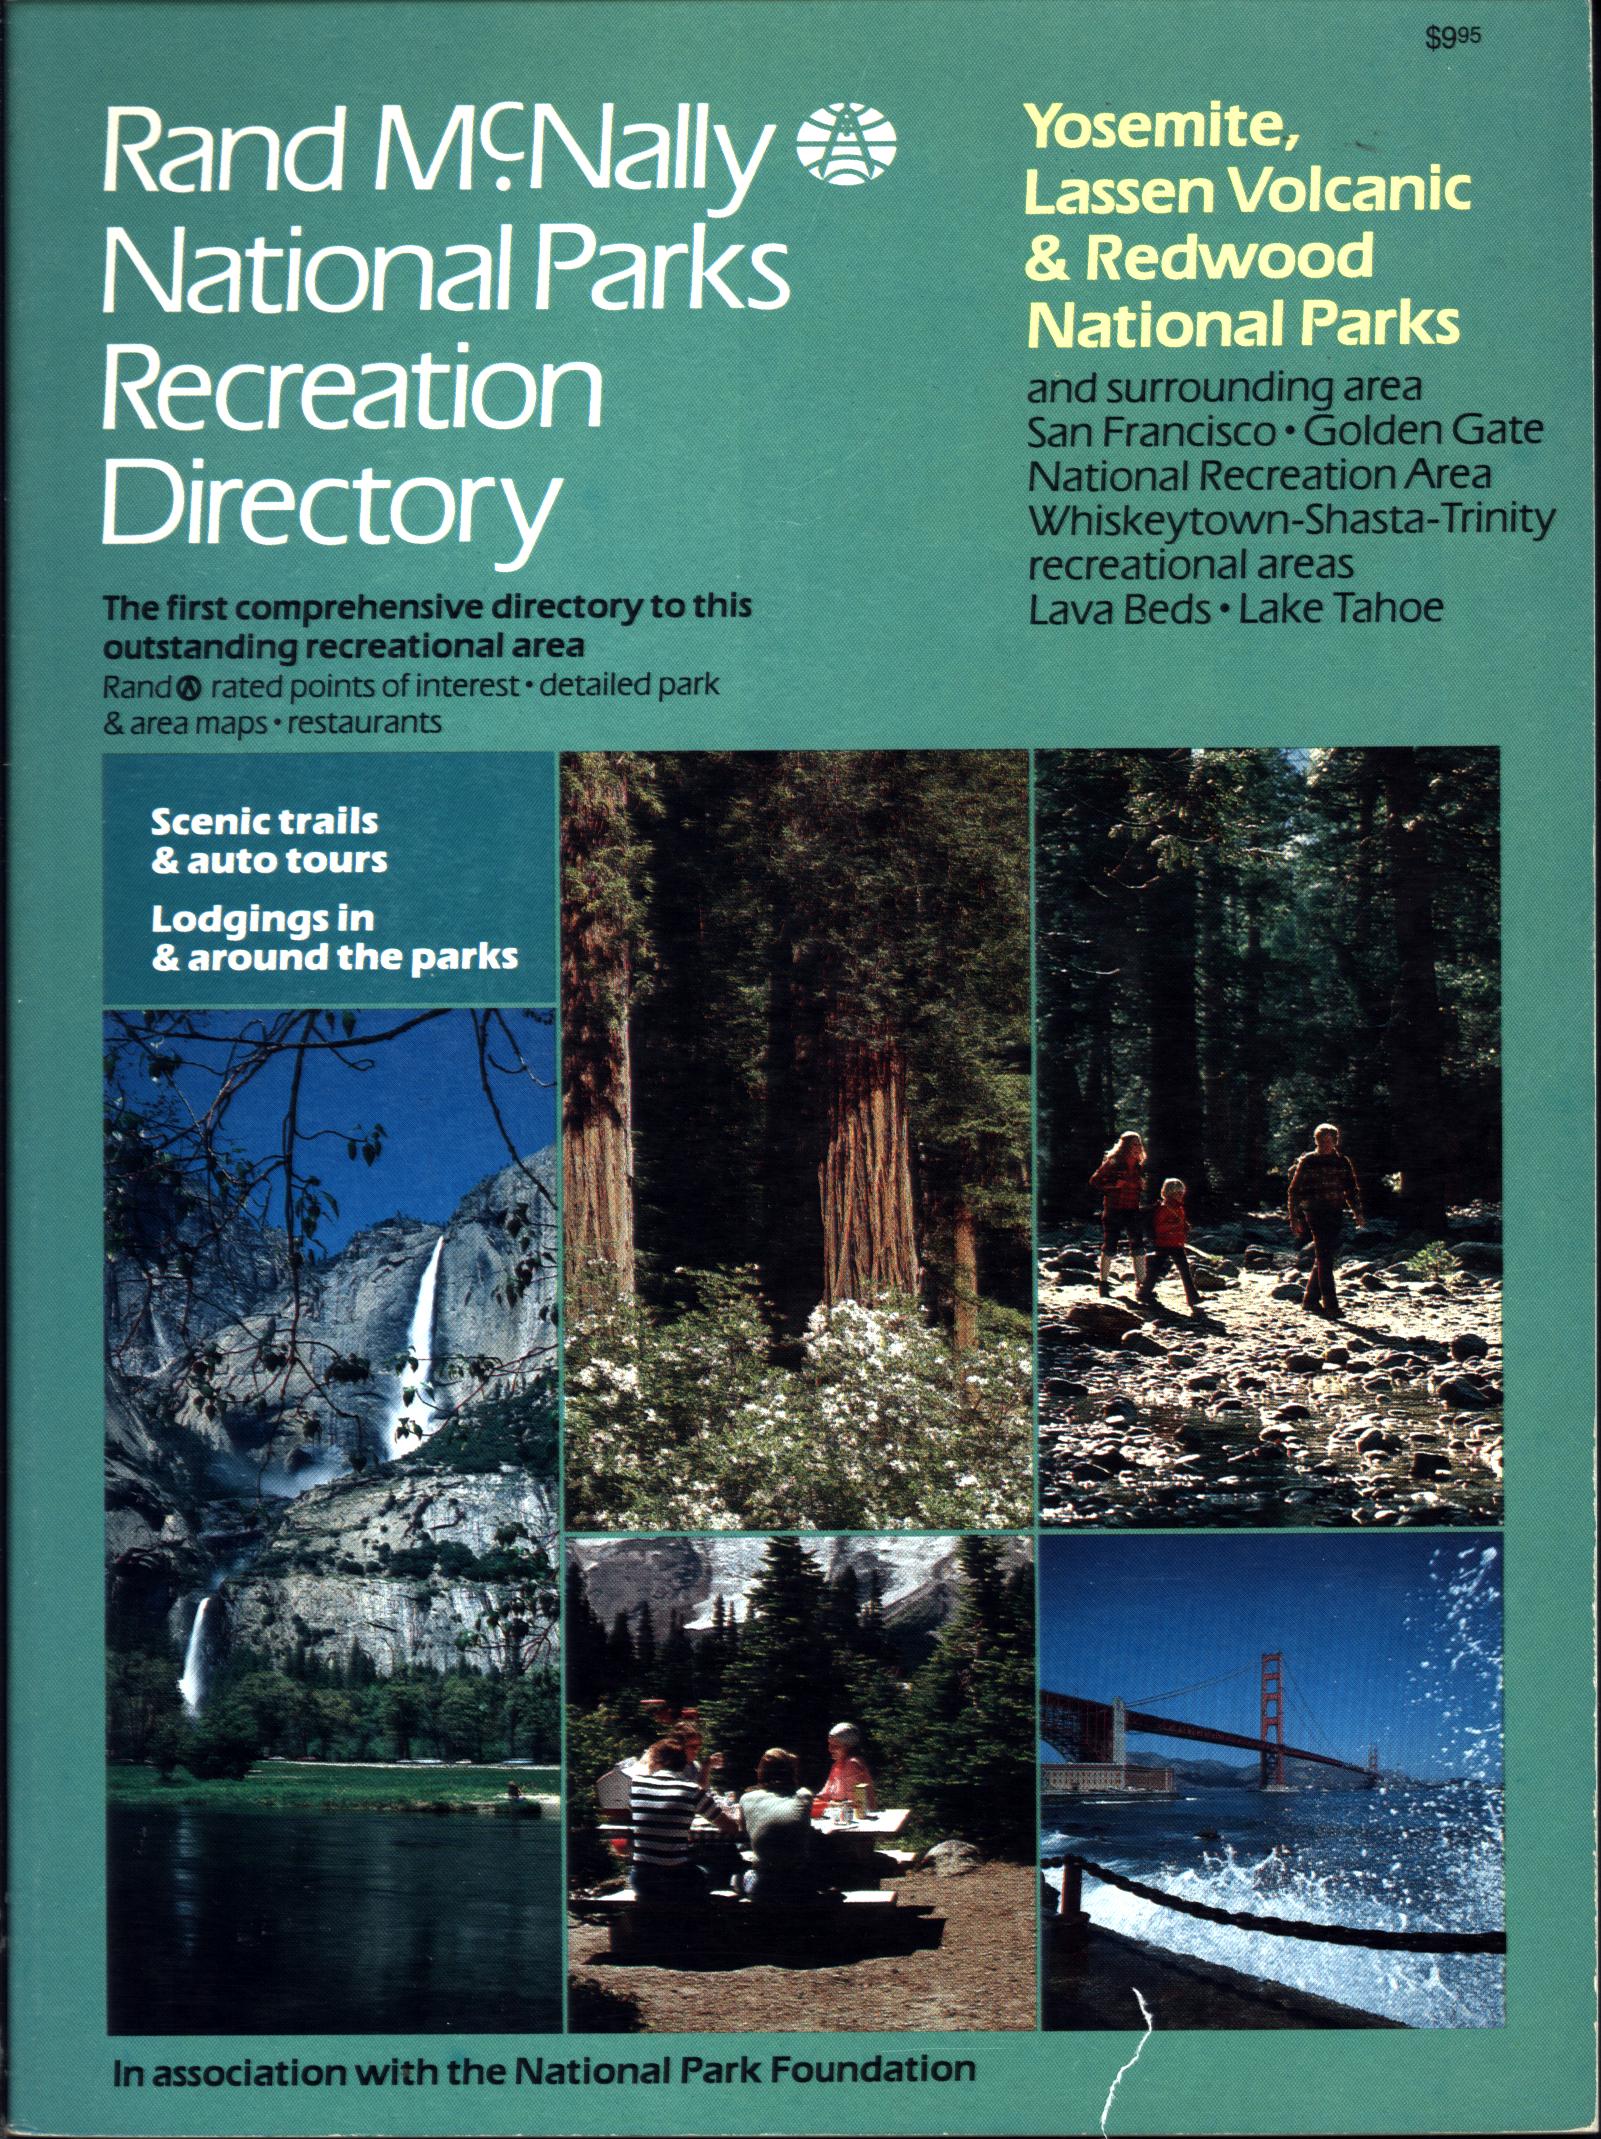 YOSEMITE, LASSEN VOLCANIC & REDWOOD NATIONAL PARKS and surrouhnding area. 